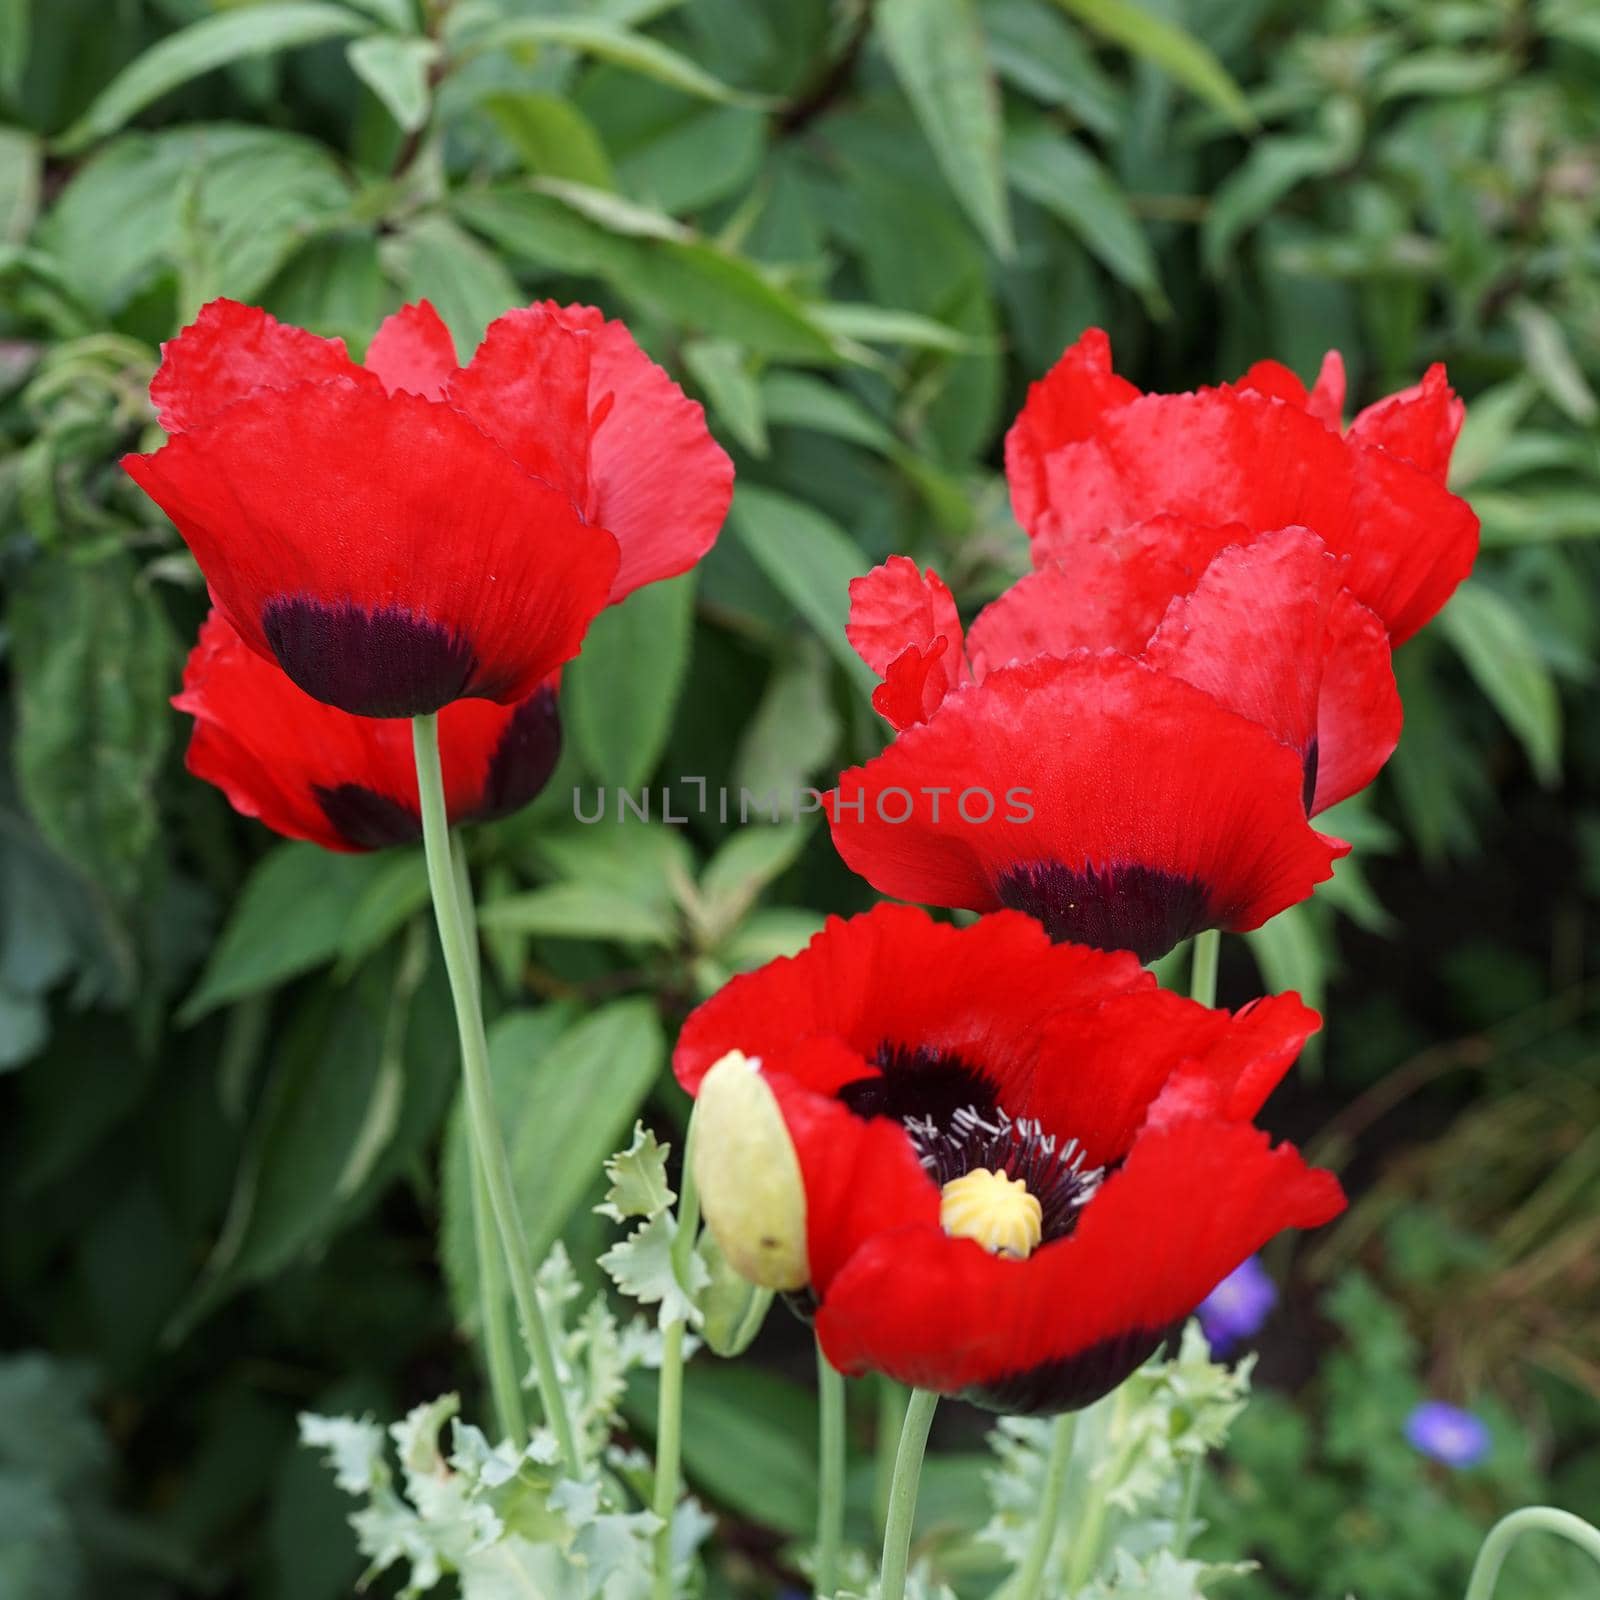 Beautiful strong coloured poppy flowers by WielandTeixeira